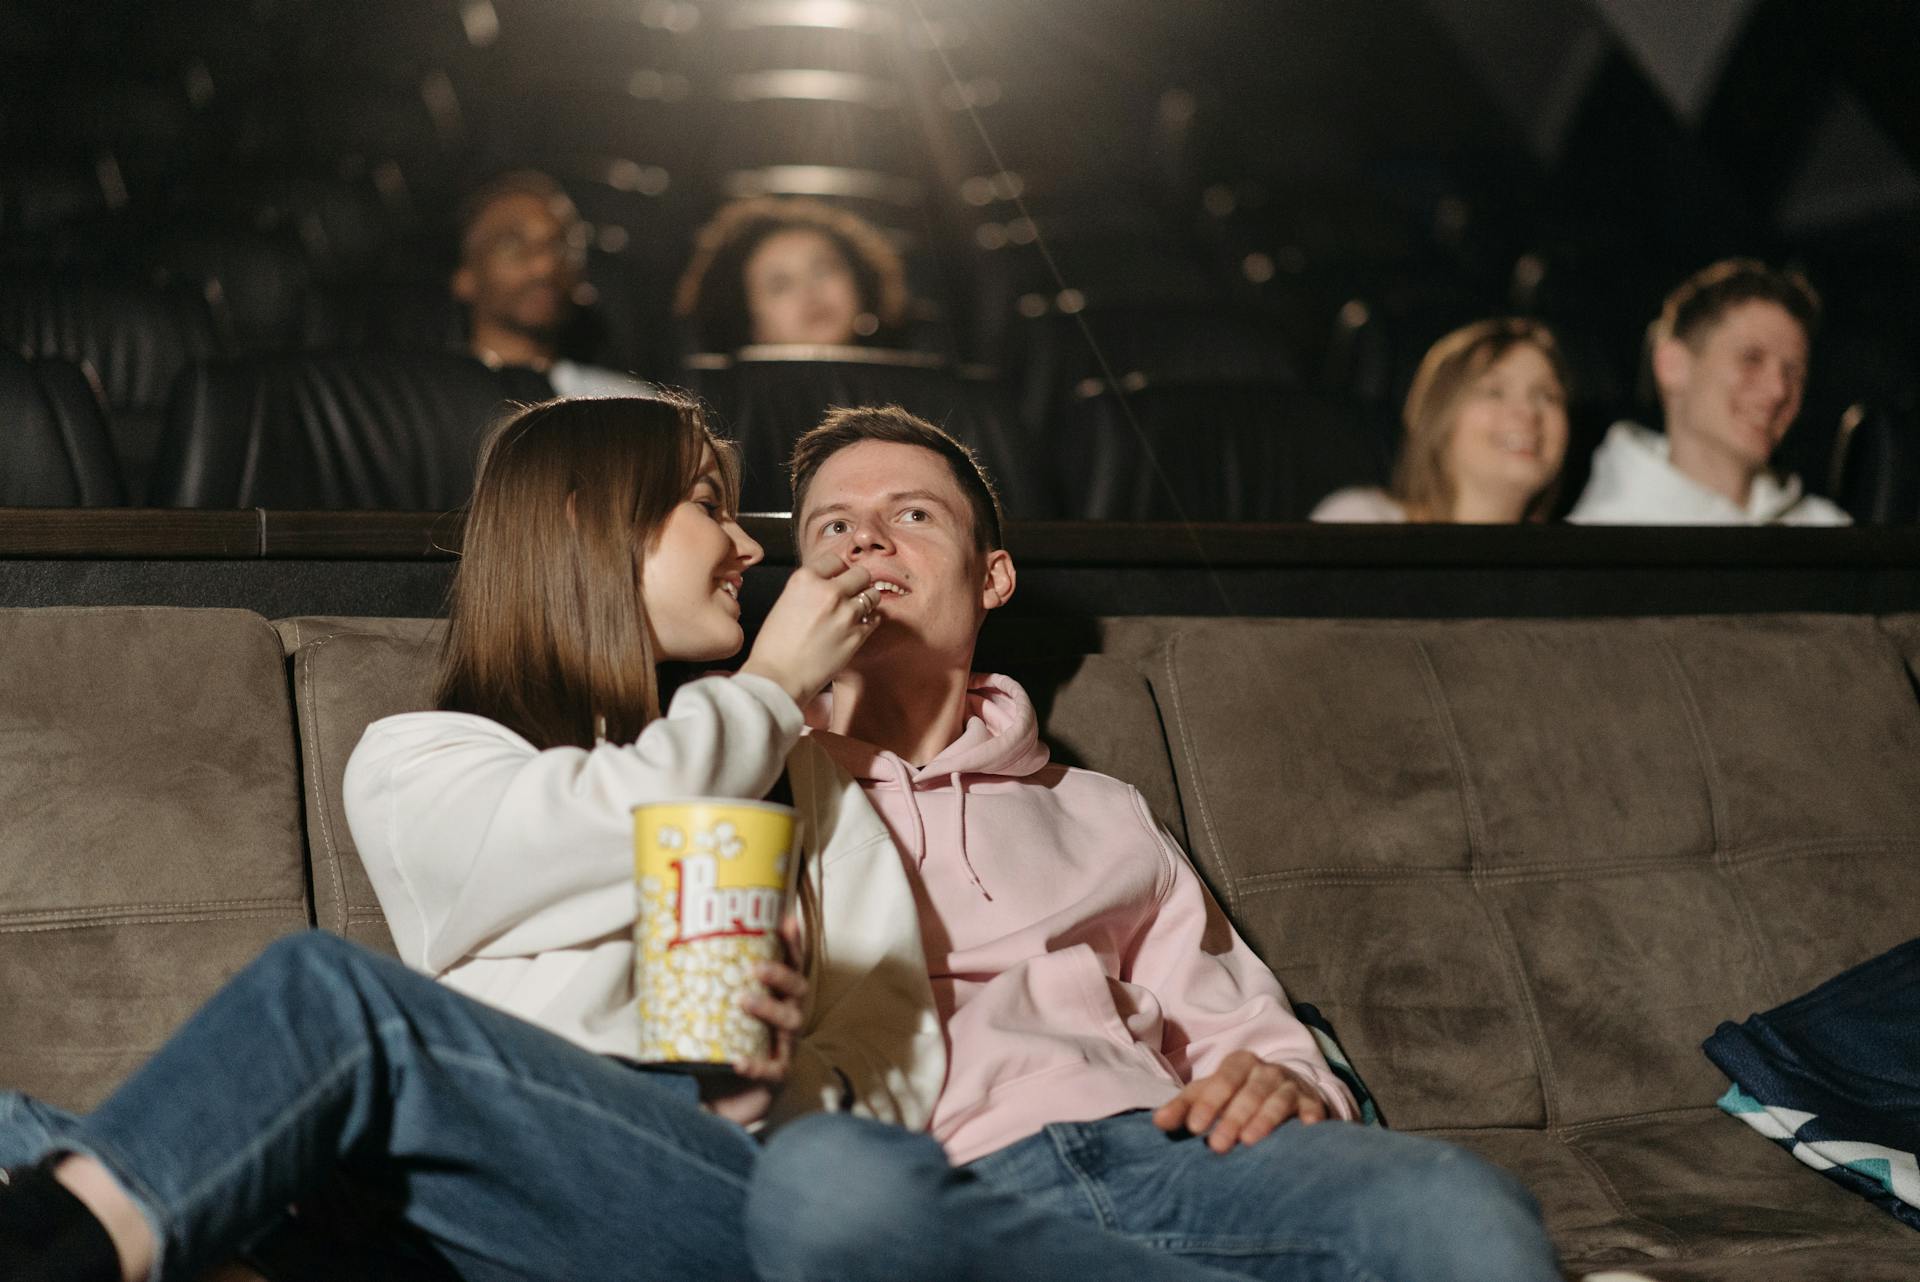 Couple eating popcorn while watching a movie in a cinema | Source: Pexels